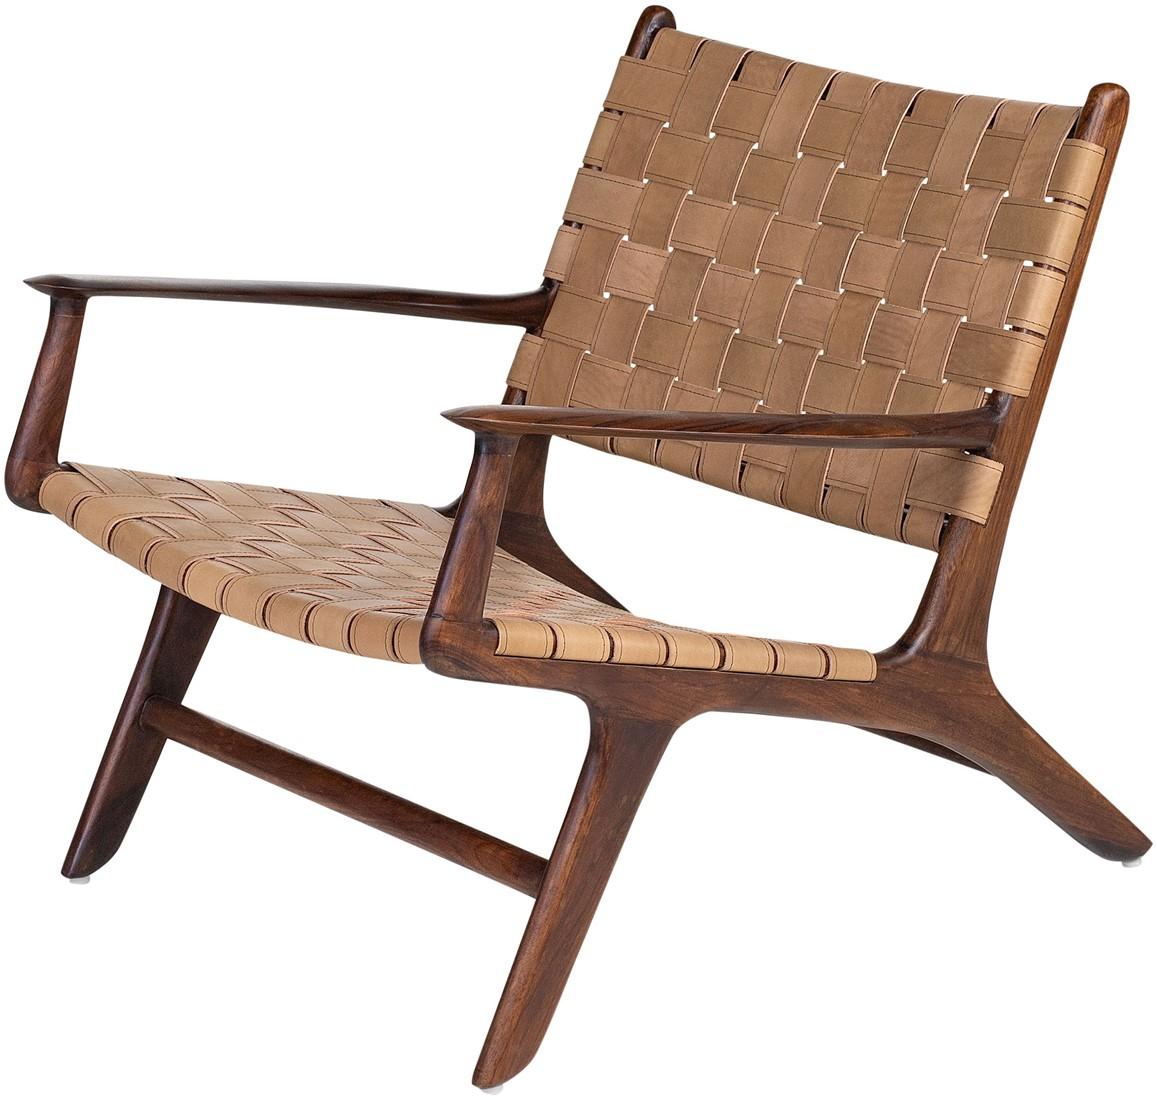 Danish Design Style Teak Wooden and Leather Chair, 1950s-1960s 1